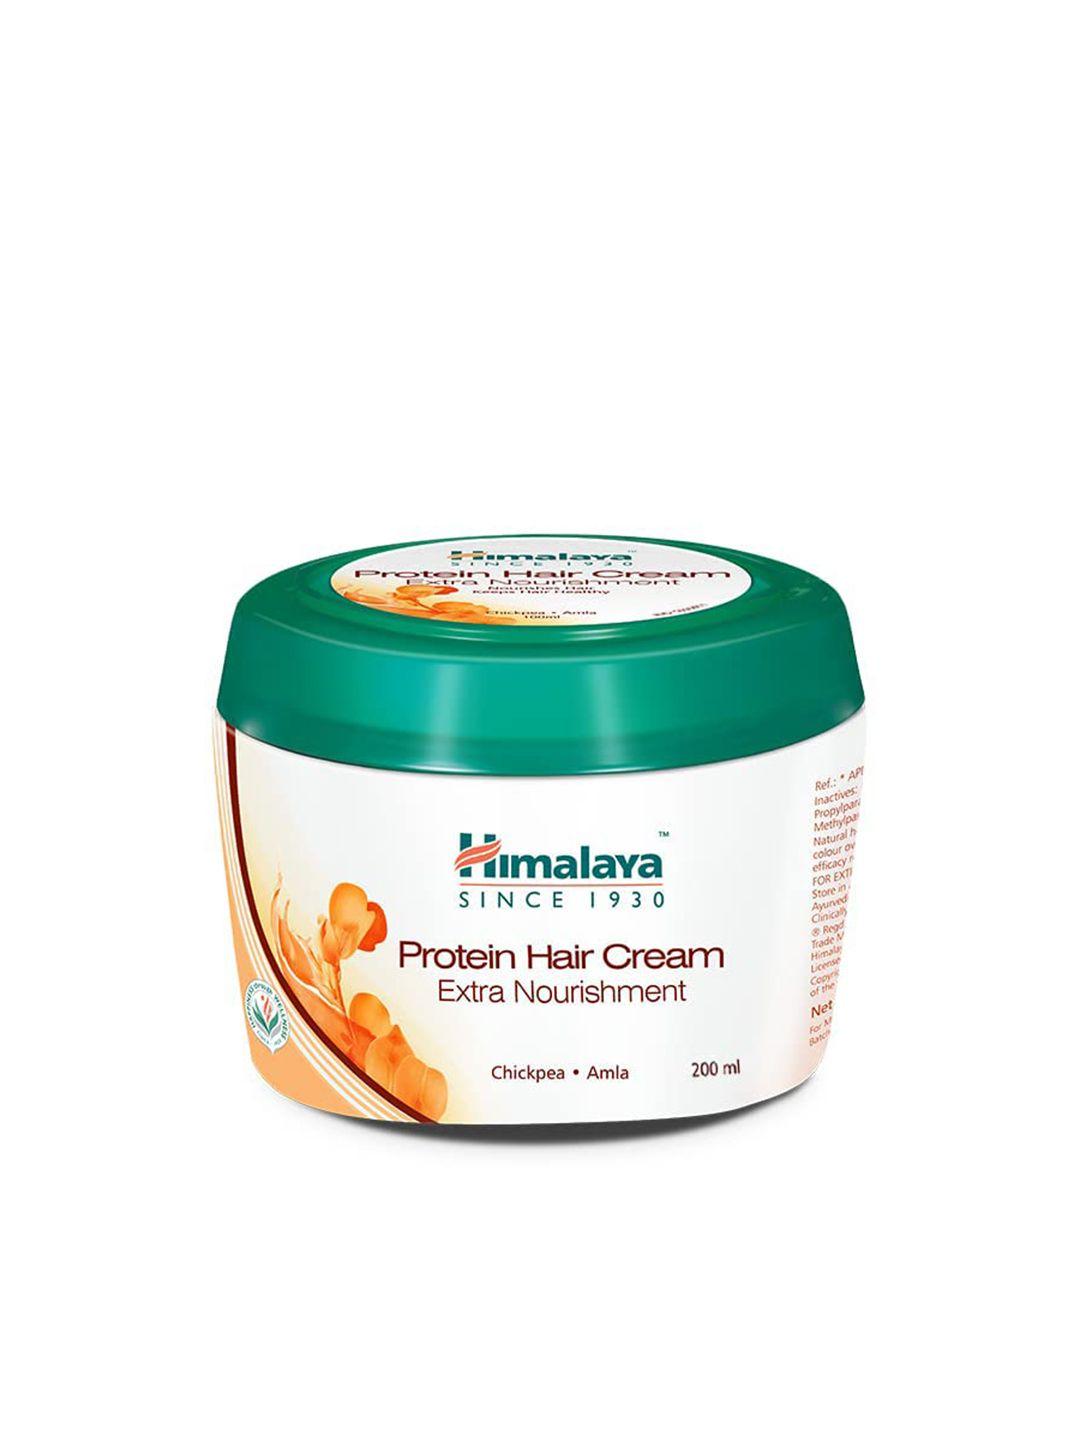 himalaya protein hair cream for extra nourishment with chickpea & amla - 200 ml